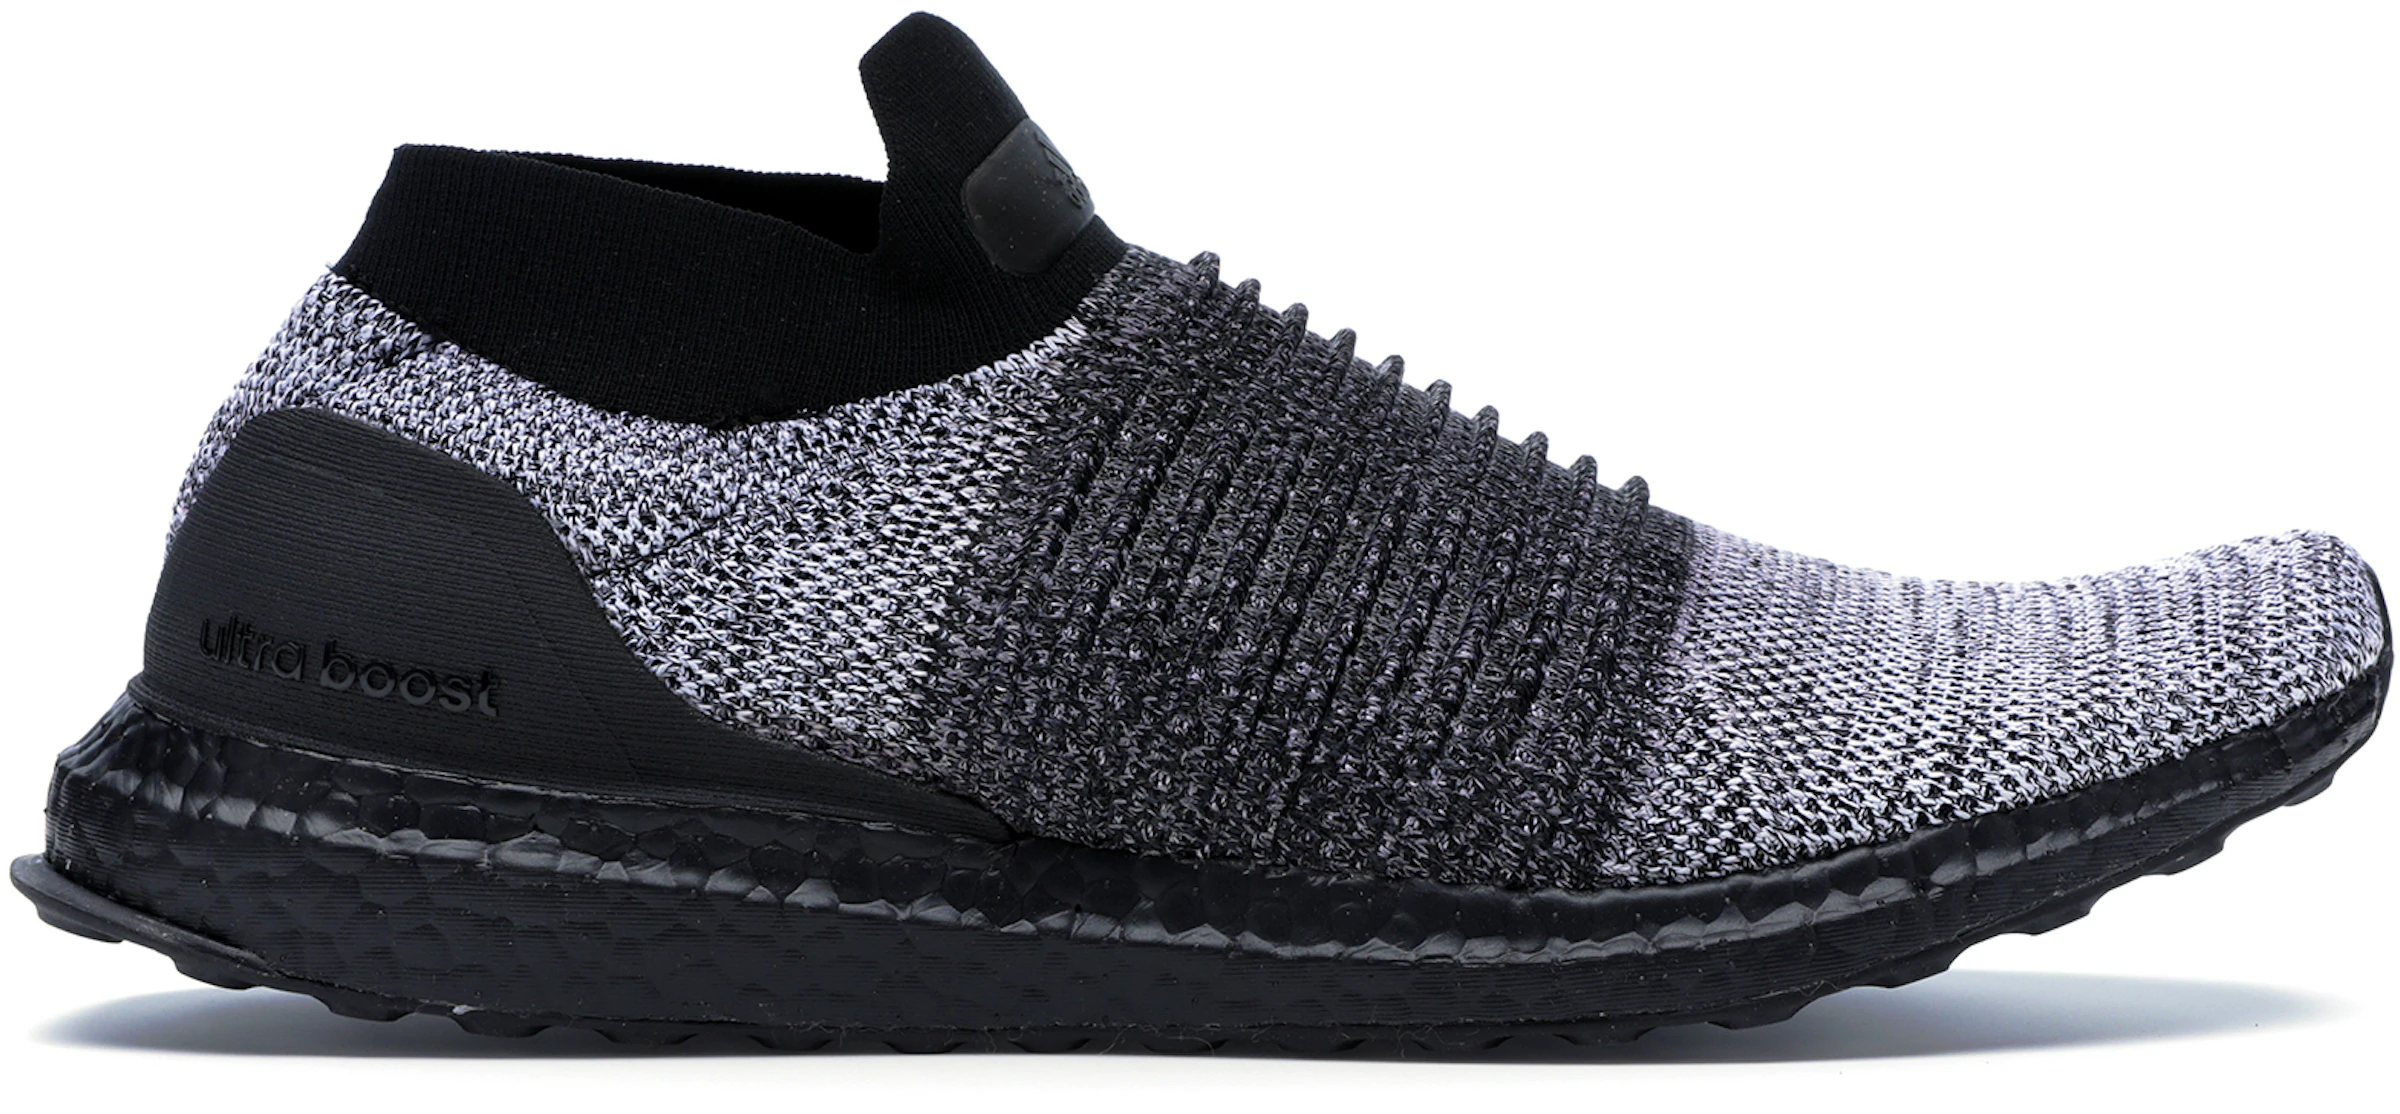 Notable Converger solo adidas Ultra Boost Laceless Mid Black Oreo - BB6137 - ES